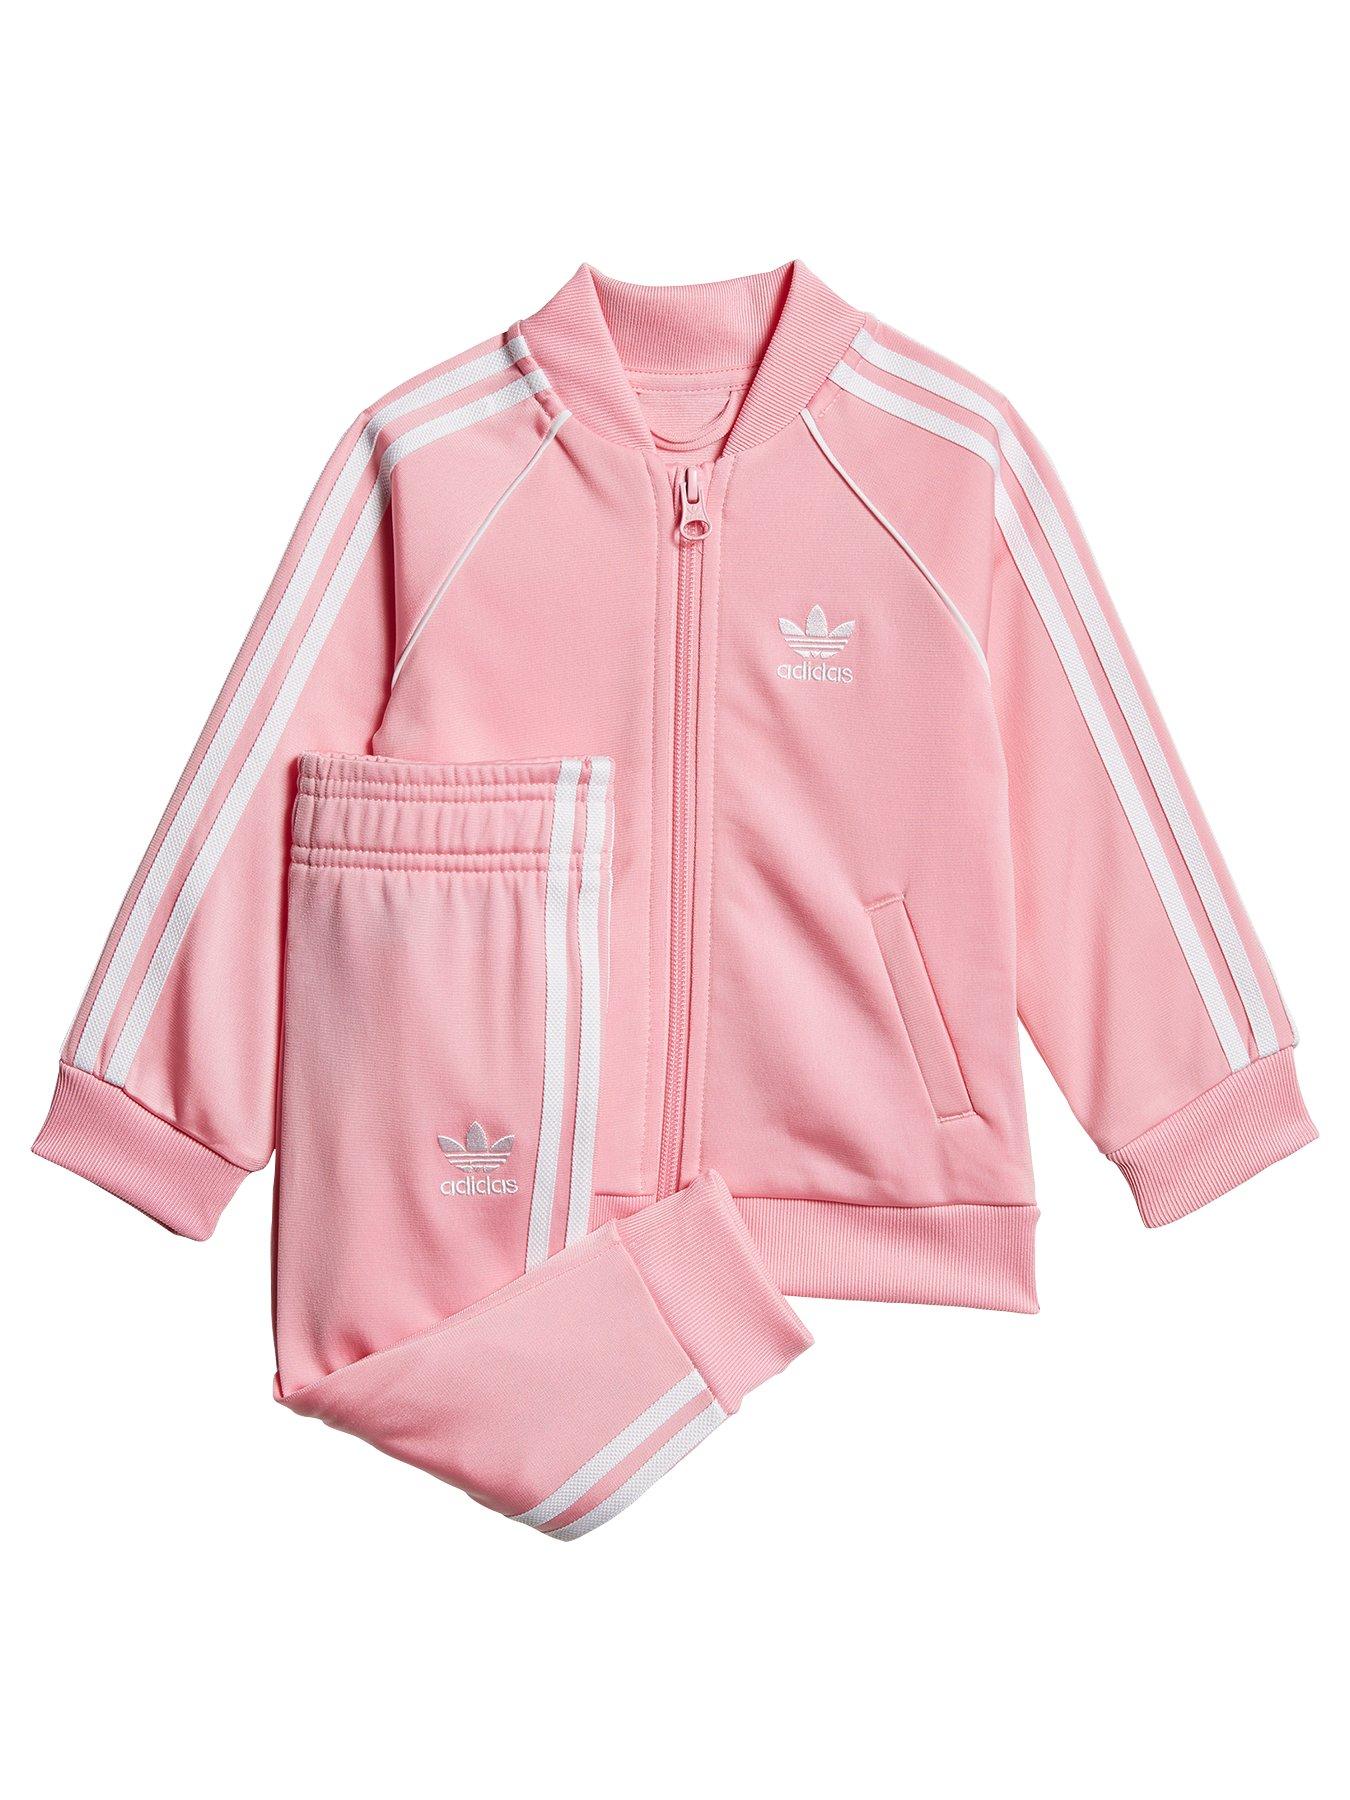 baby adidas outfit pink